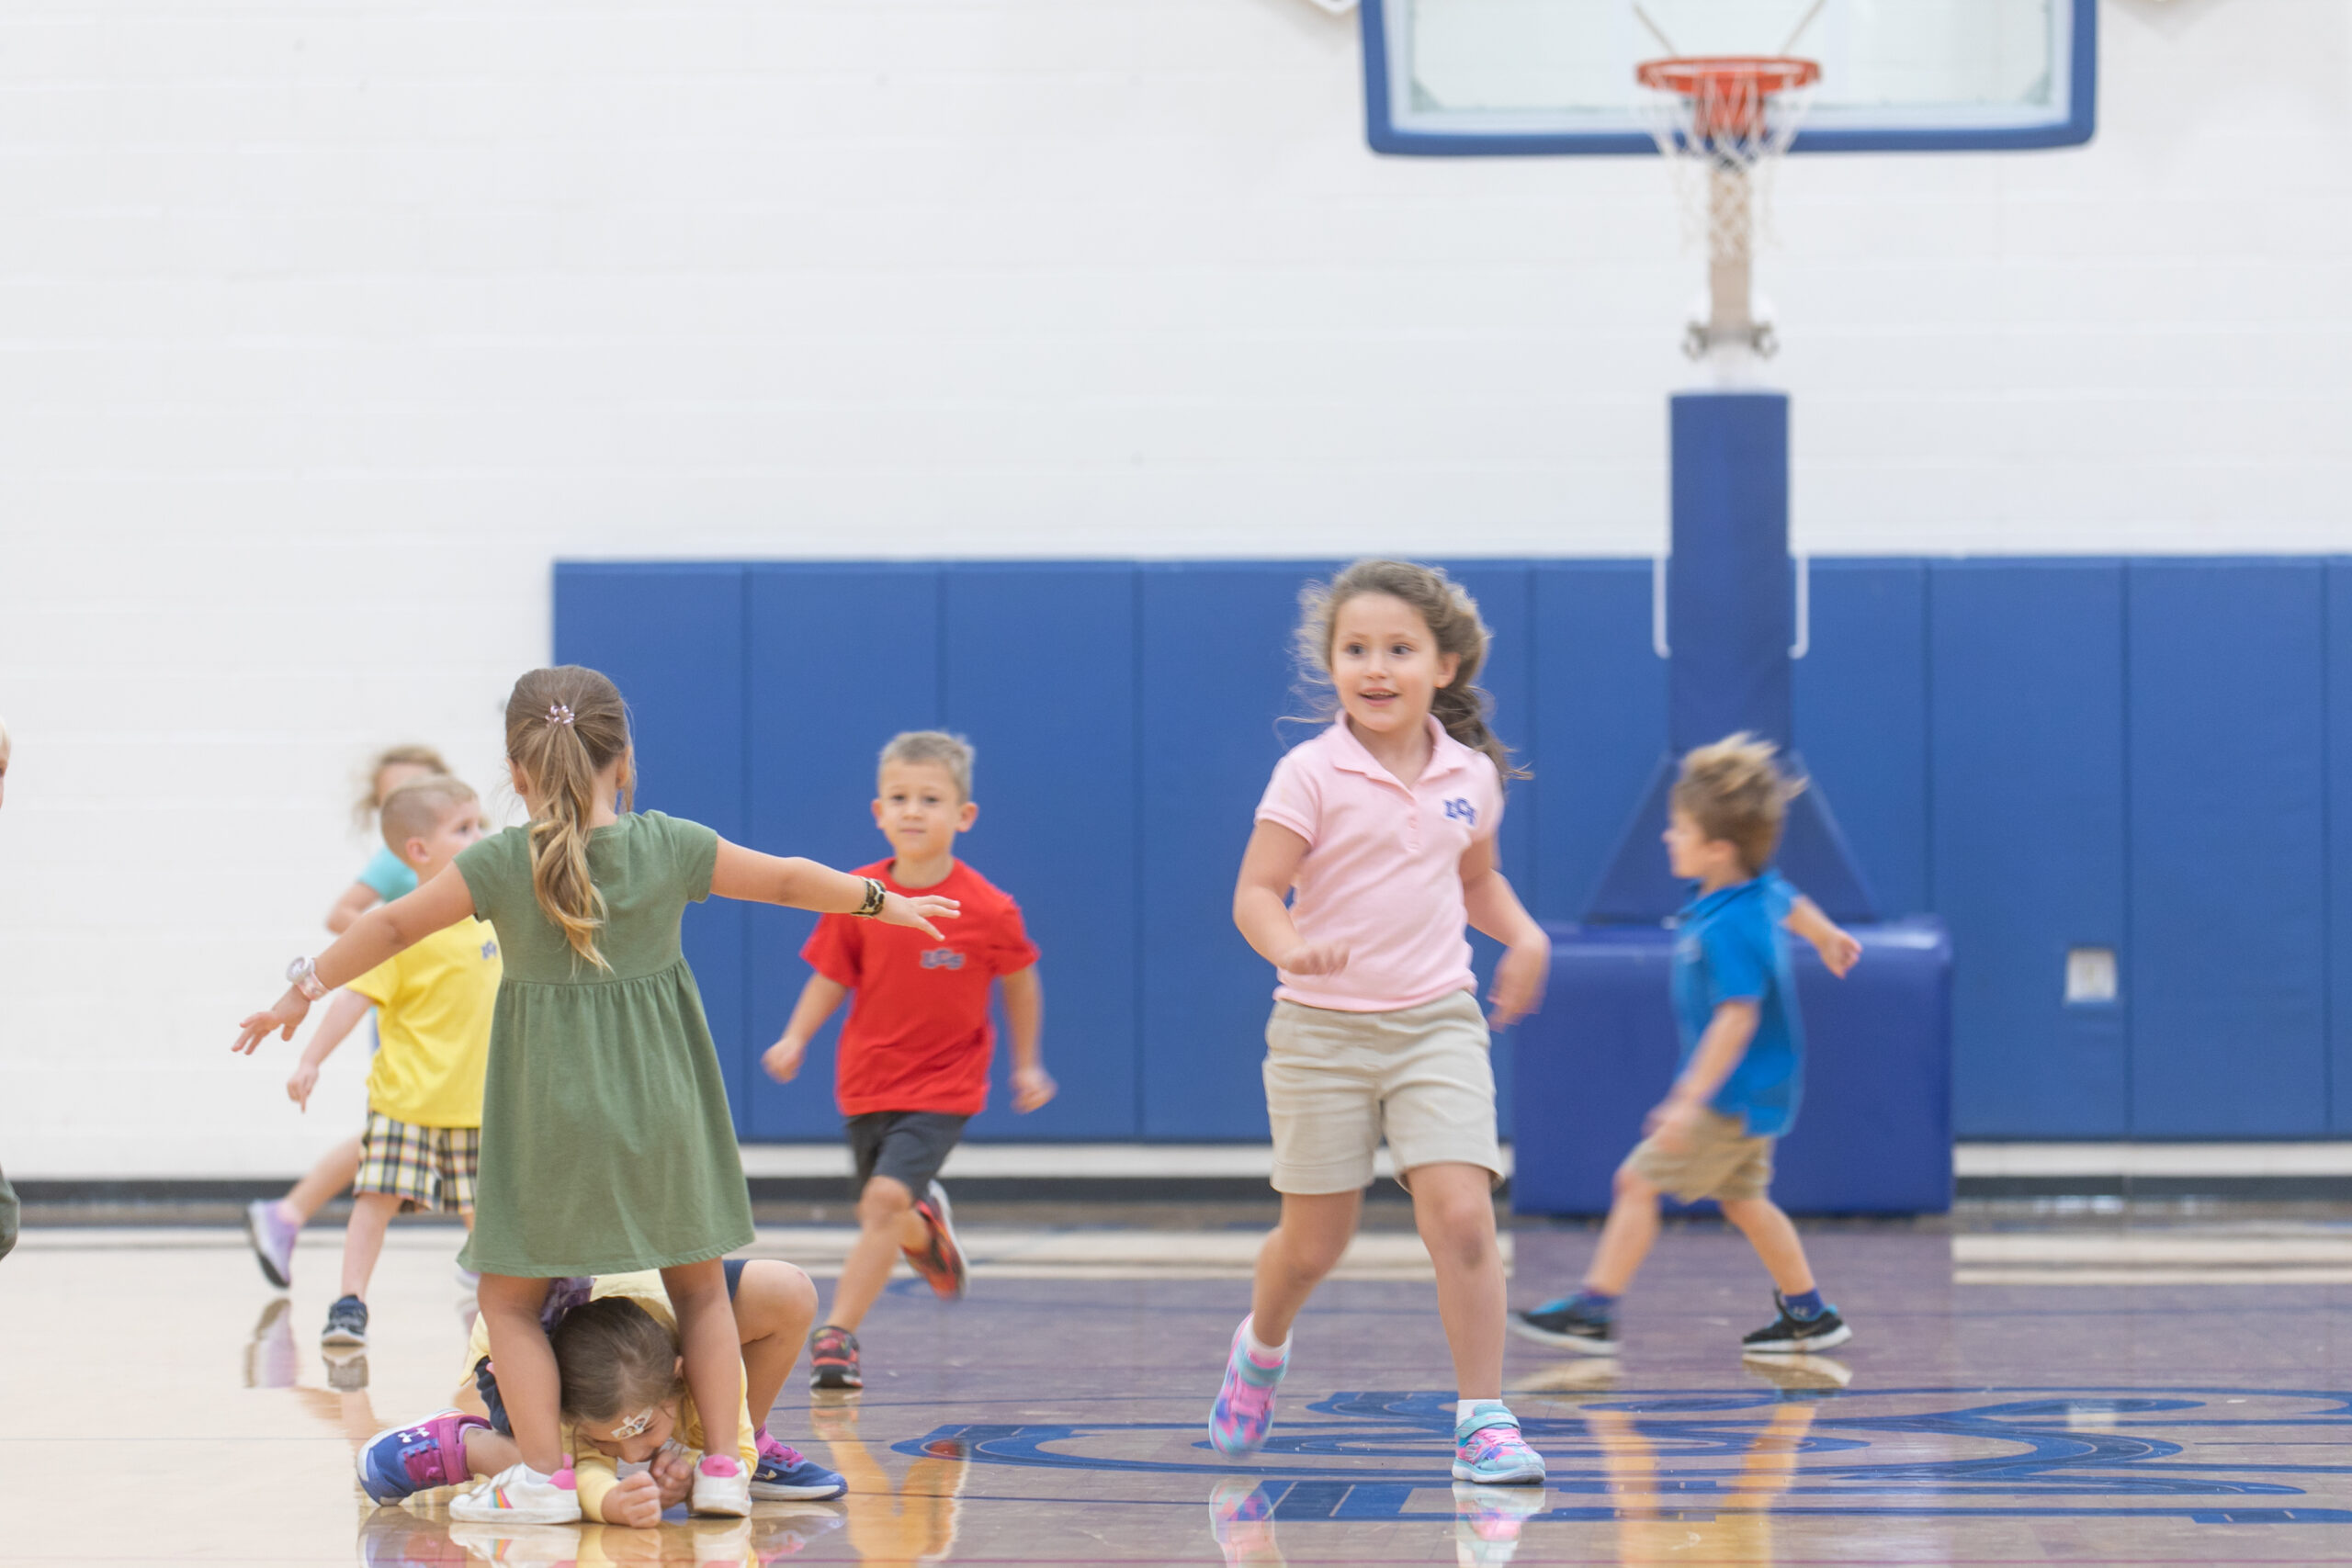 Elementary children running around the basketball court playing during physical education